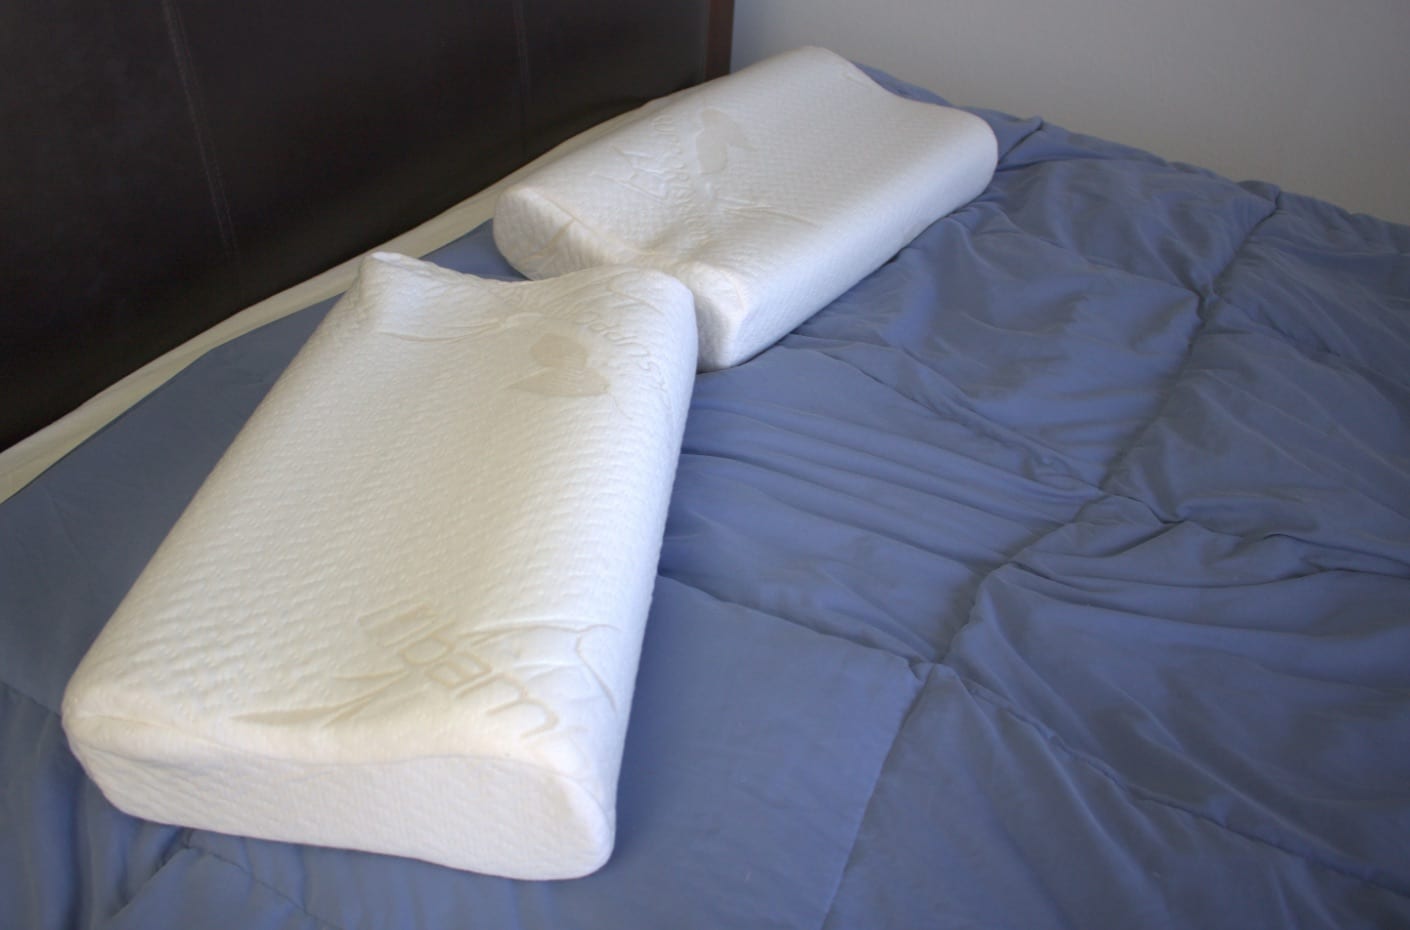 How To Choose The Best Acid Reflux Pillow in 2022?